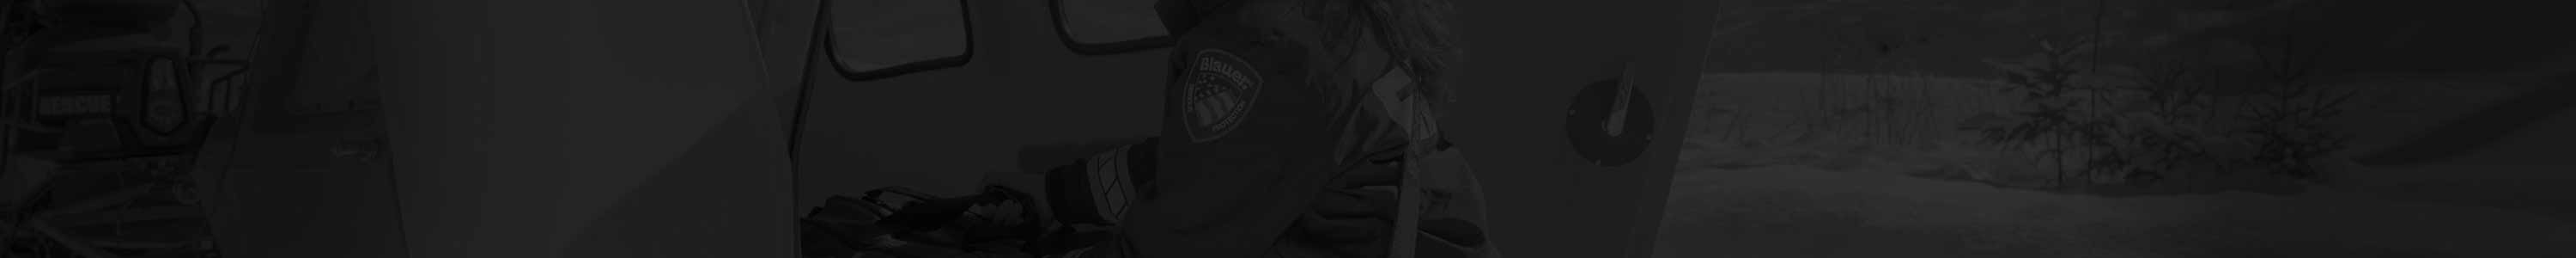 EMS Jackets & EMS Coats by Blauer